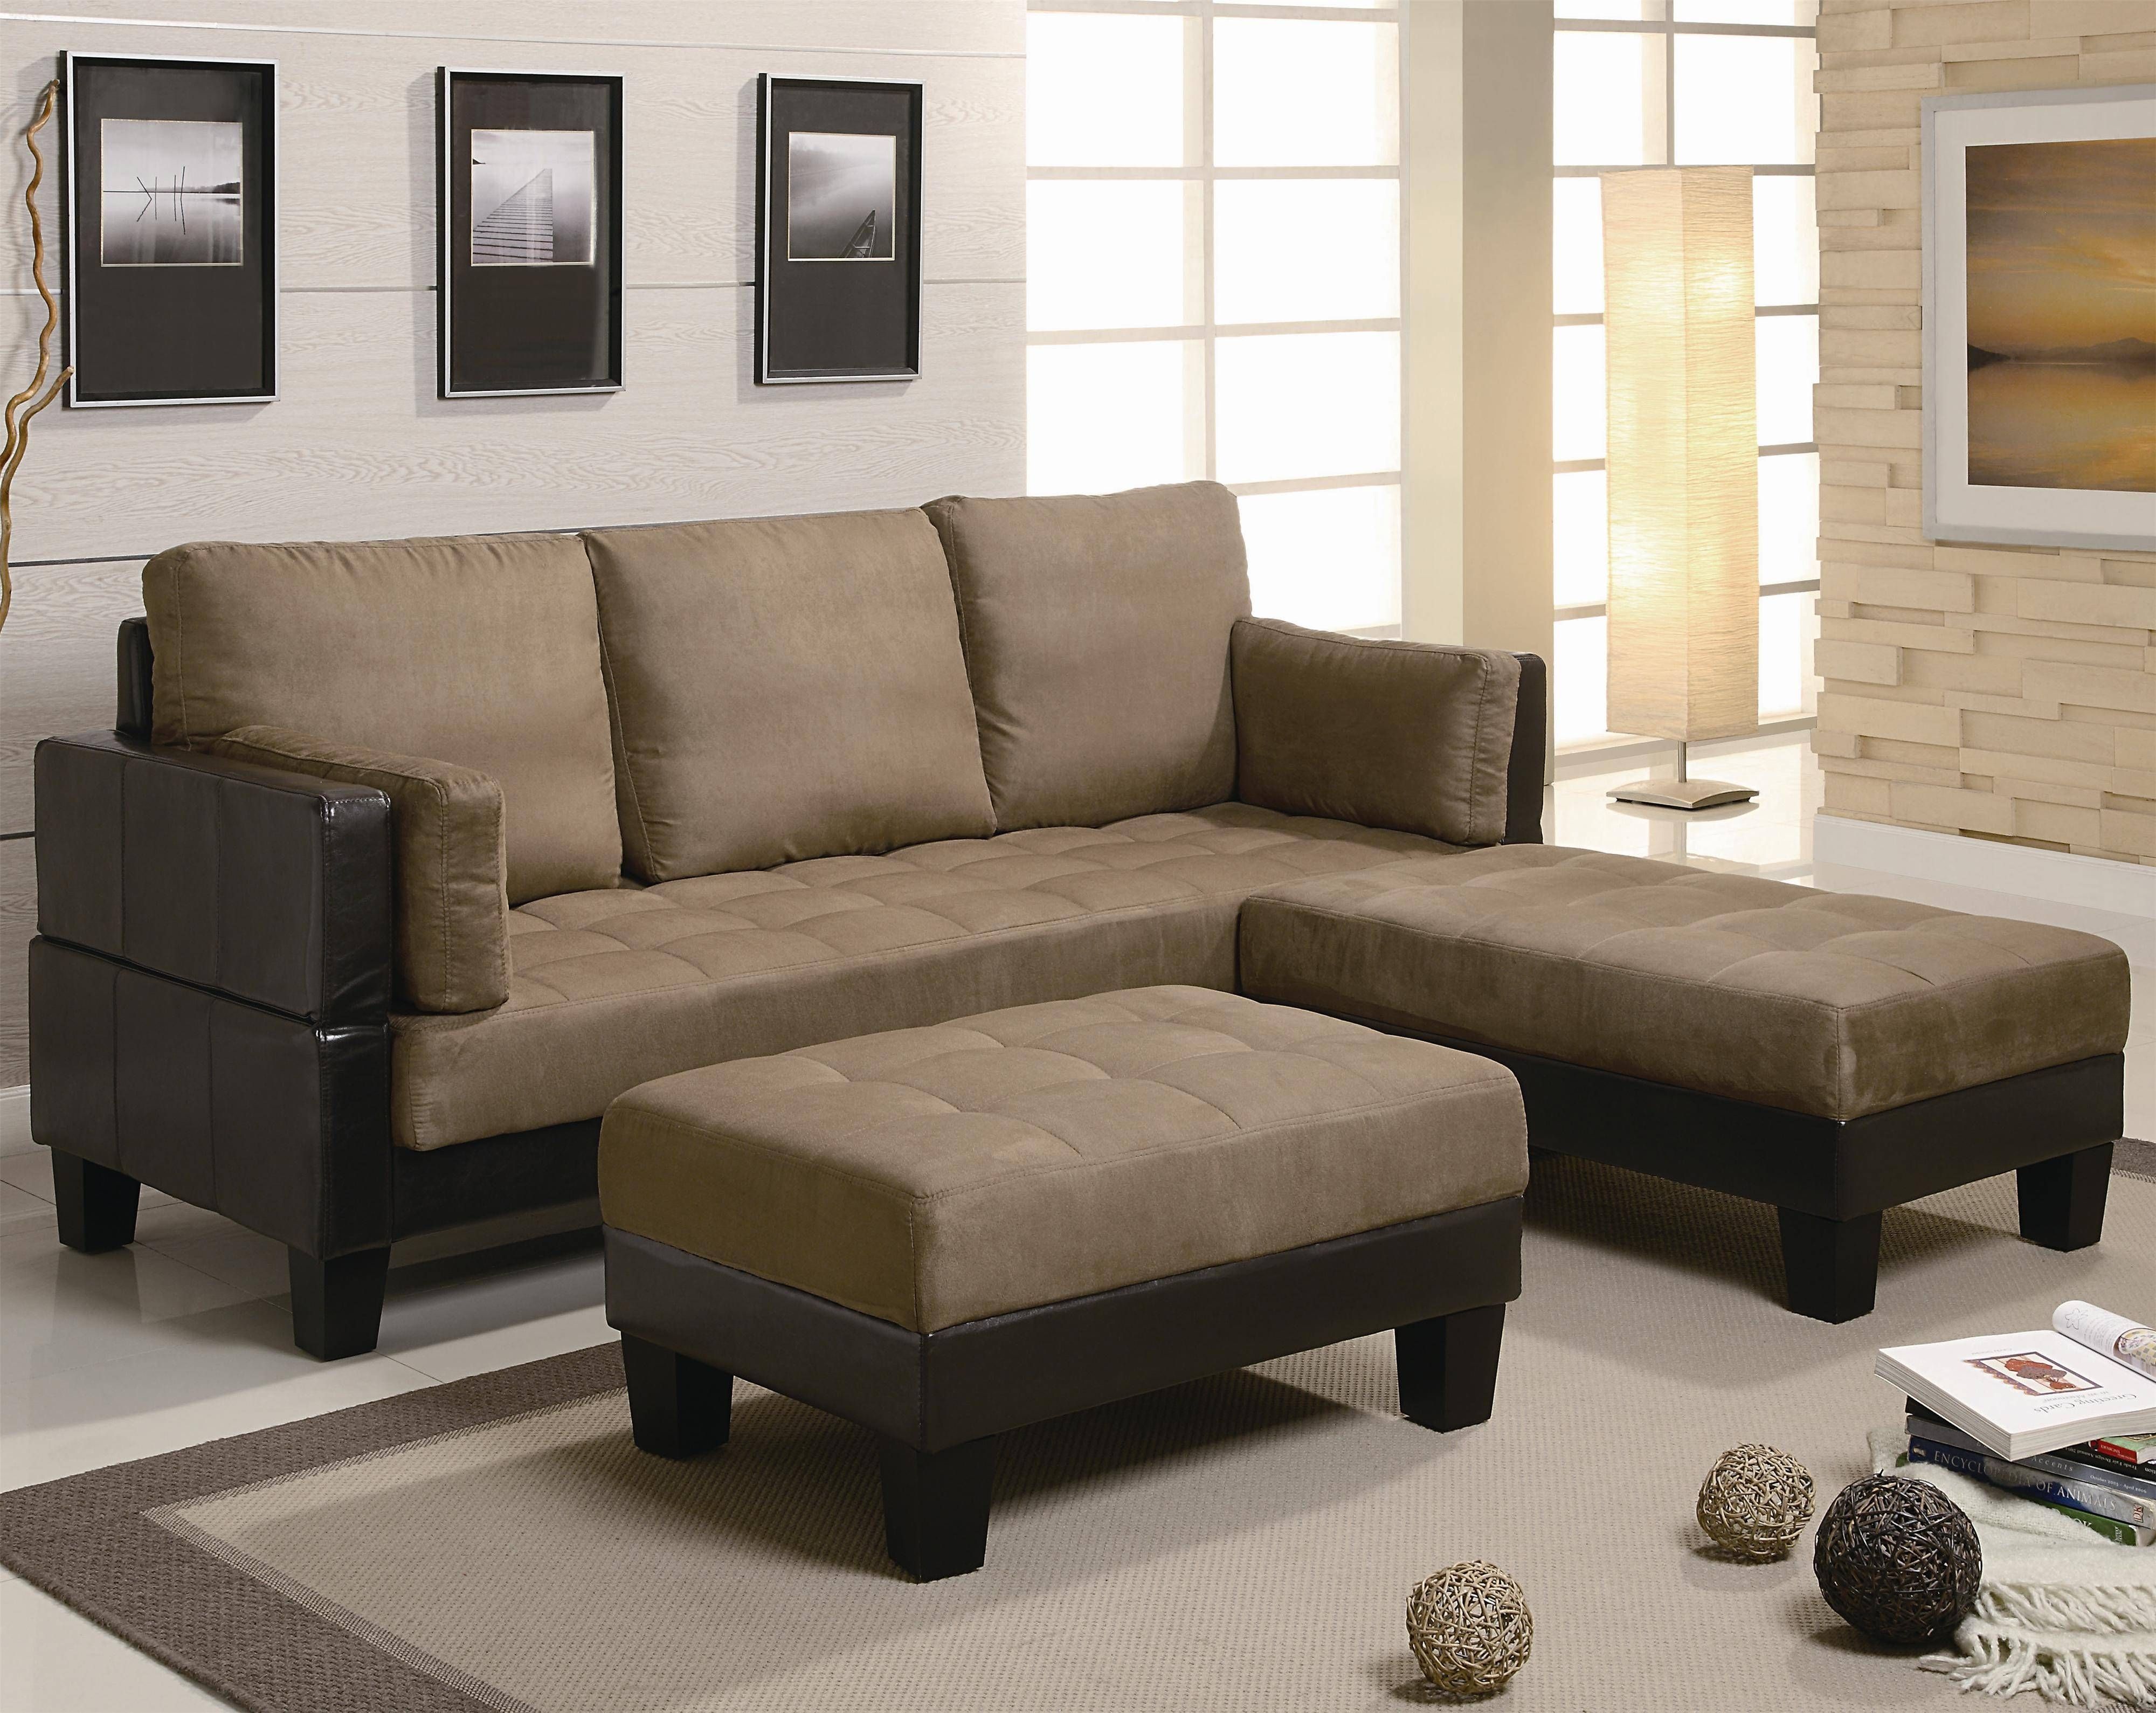 Contemporary Two Tone Brown Microfiber Convertible Sofa Bed With With Two Tone Sofas (View 9 of 30)